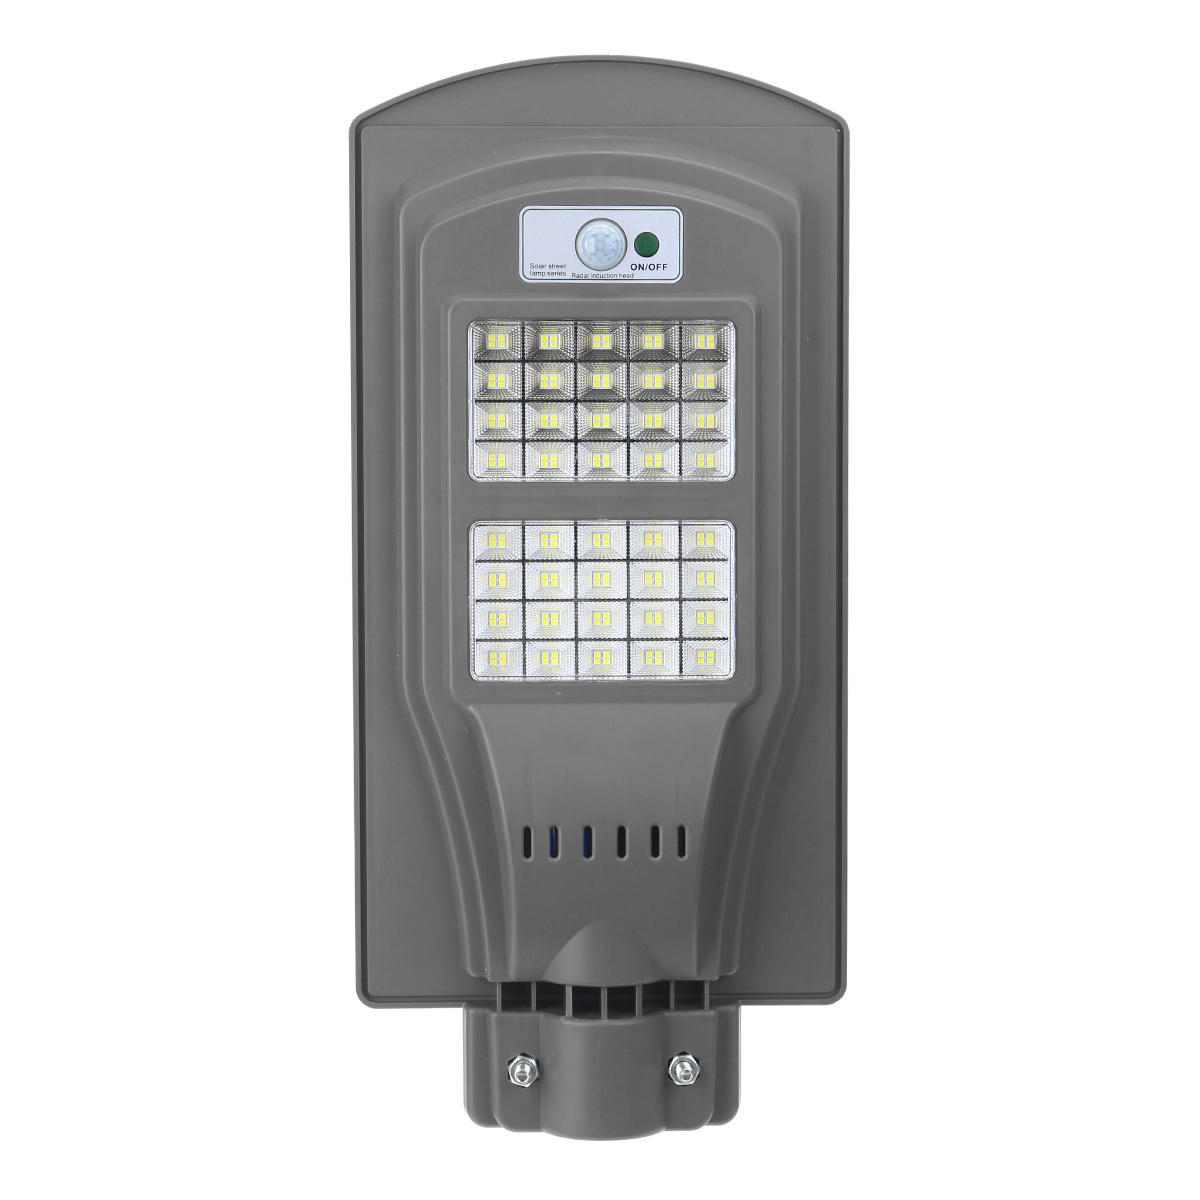 Find 80/160/240/320LED Solar Street Light PIR Motion Sensor Wall Lamp W/Remote Waterproof for Sale on Gipsybee.com with cryptocurrencies